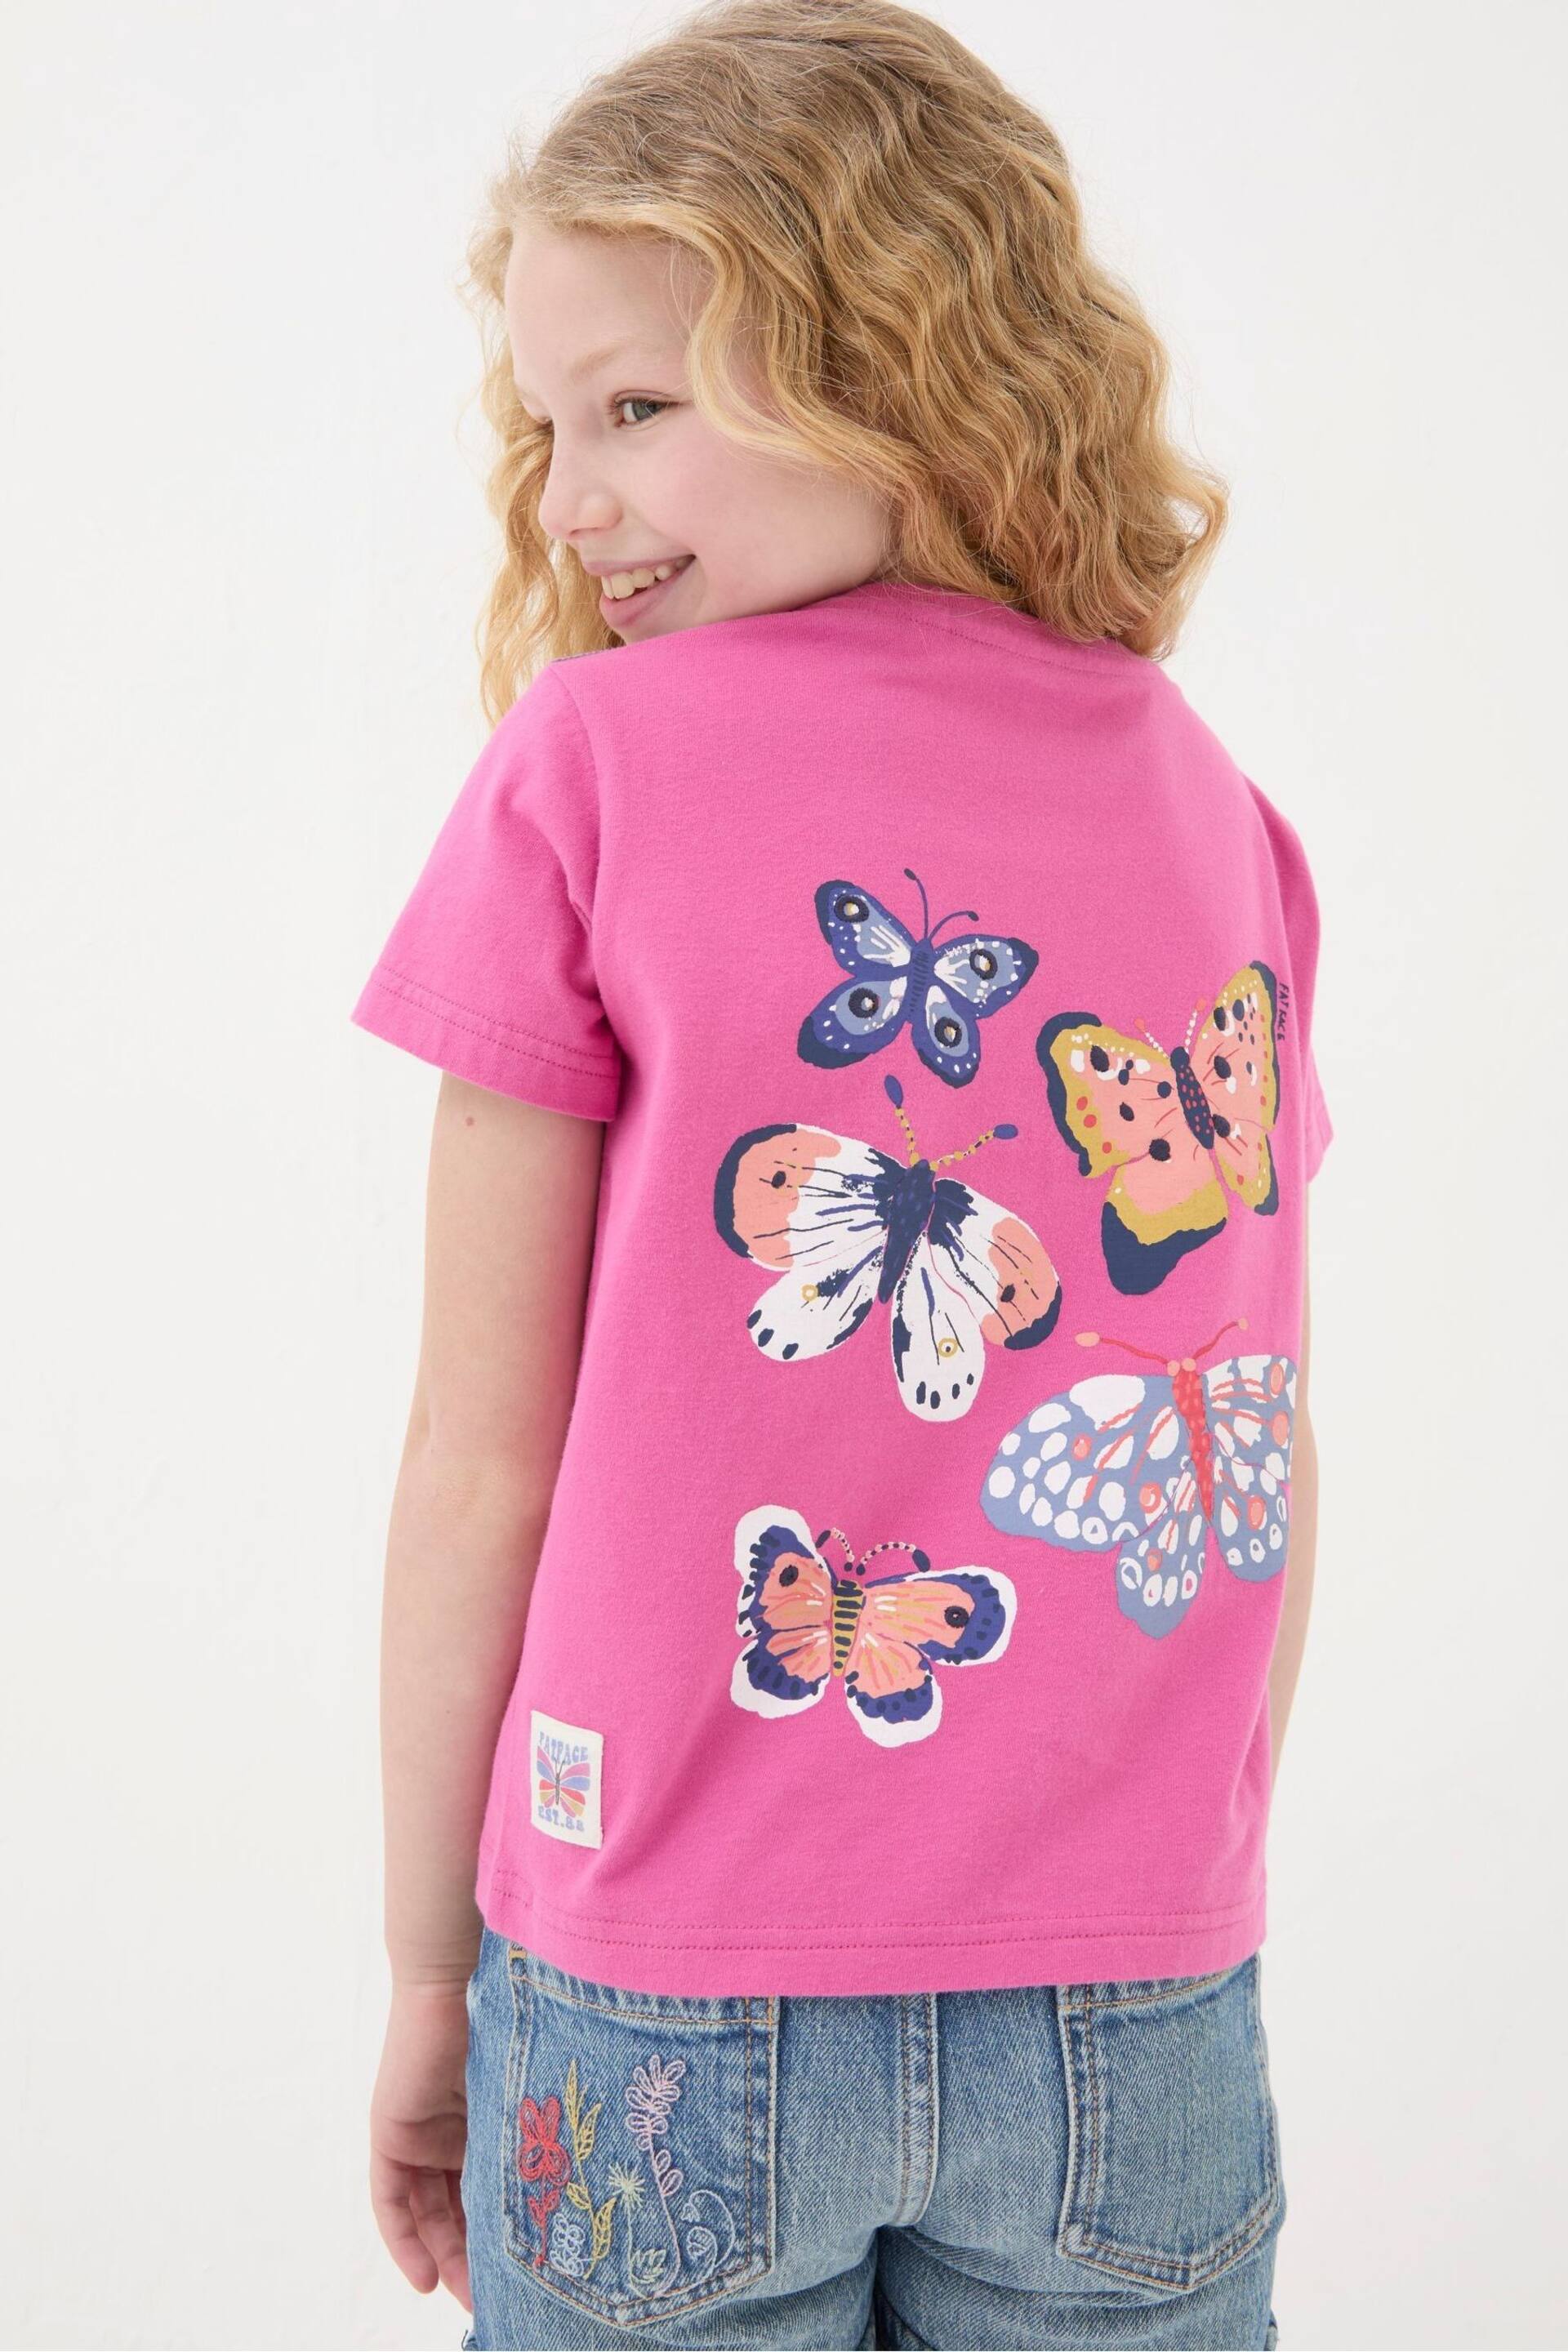 FatFace Pink Butterfly Fact T-Shirt - Image 3 of 6